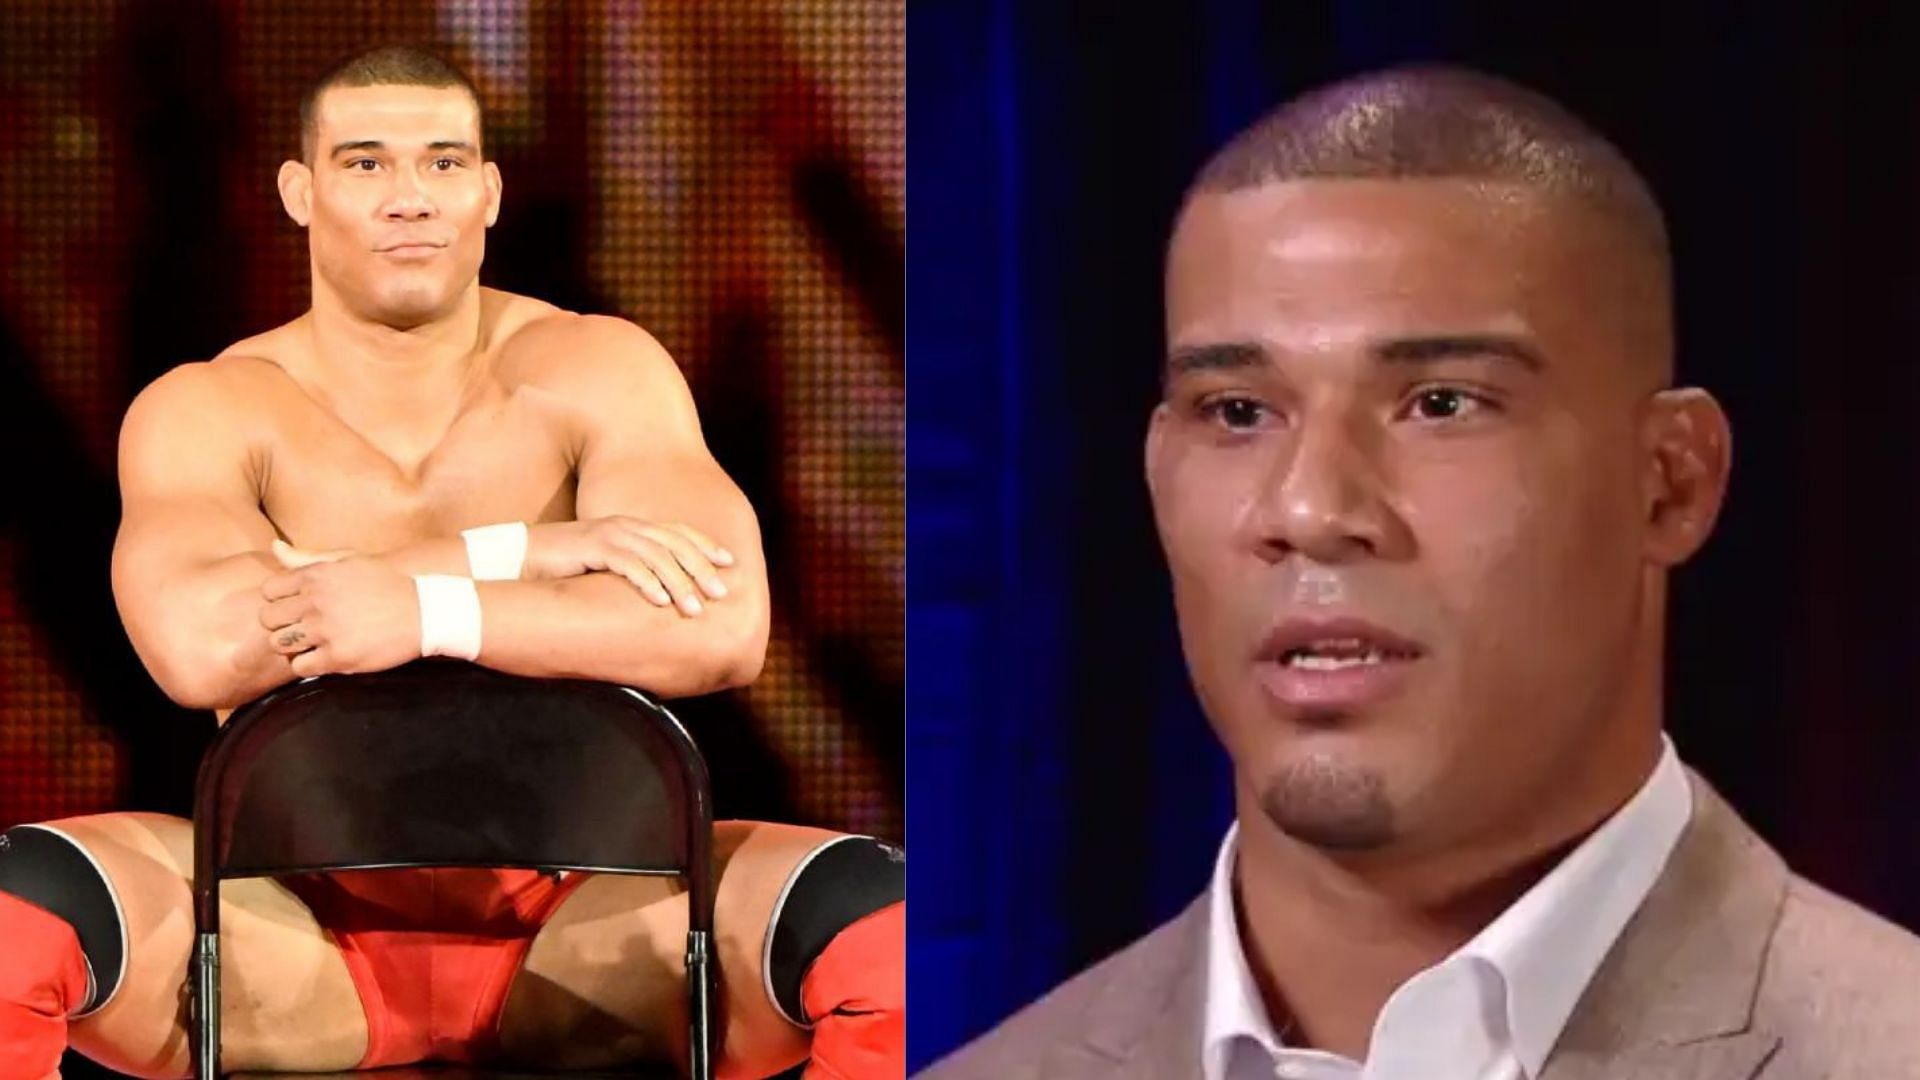 Jason Jordan found himself in a rather compromised position